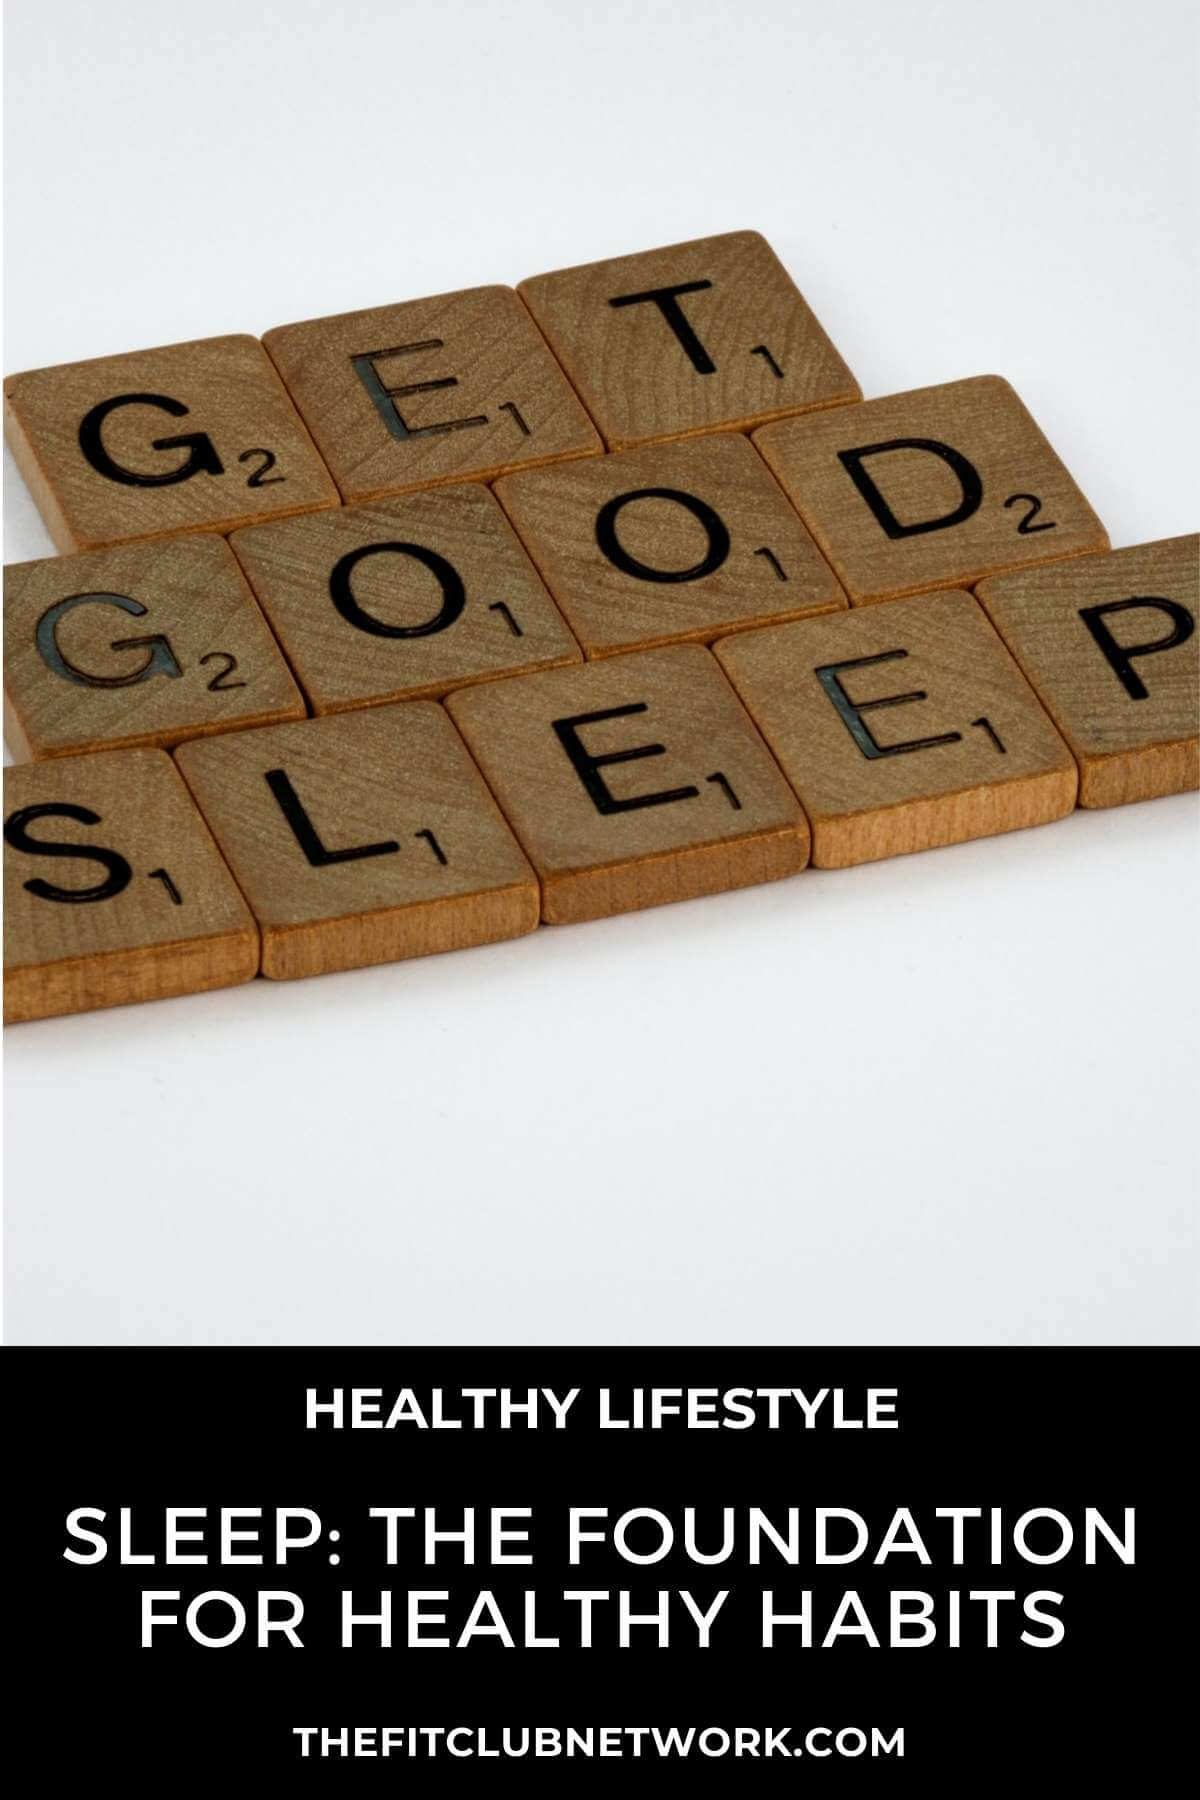 Sleep: The Foundation for Healthy Habits